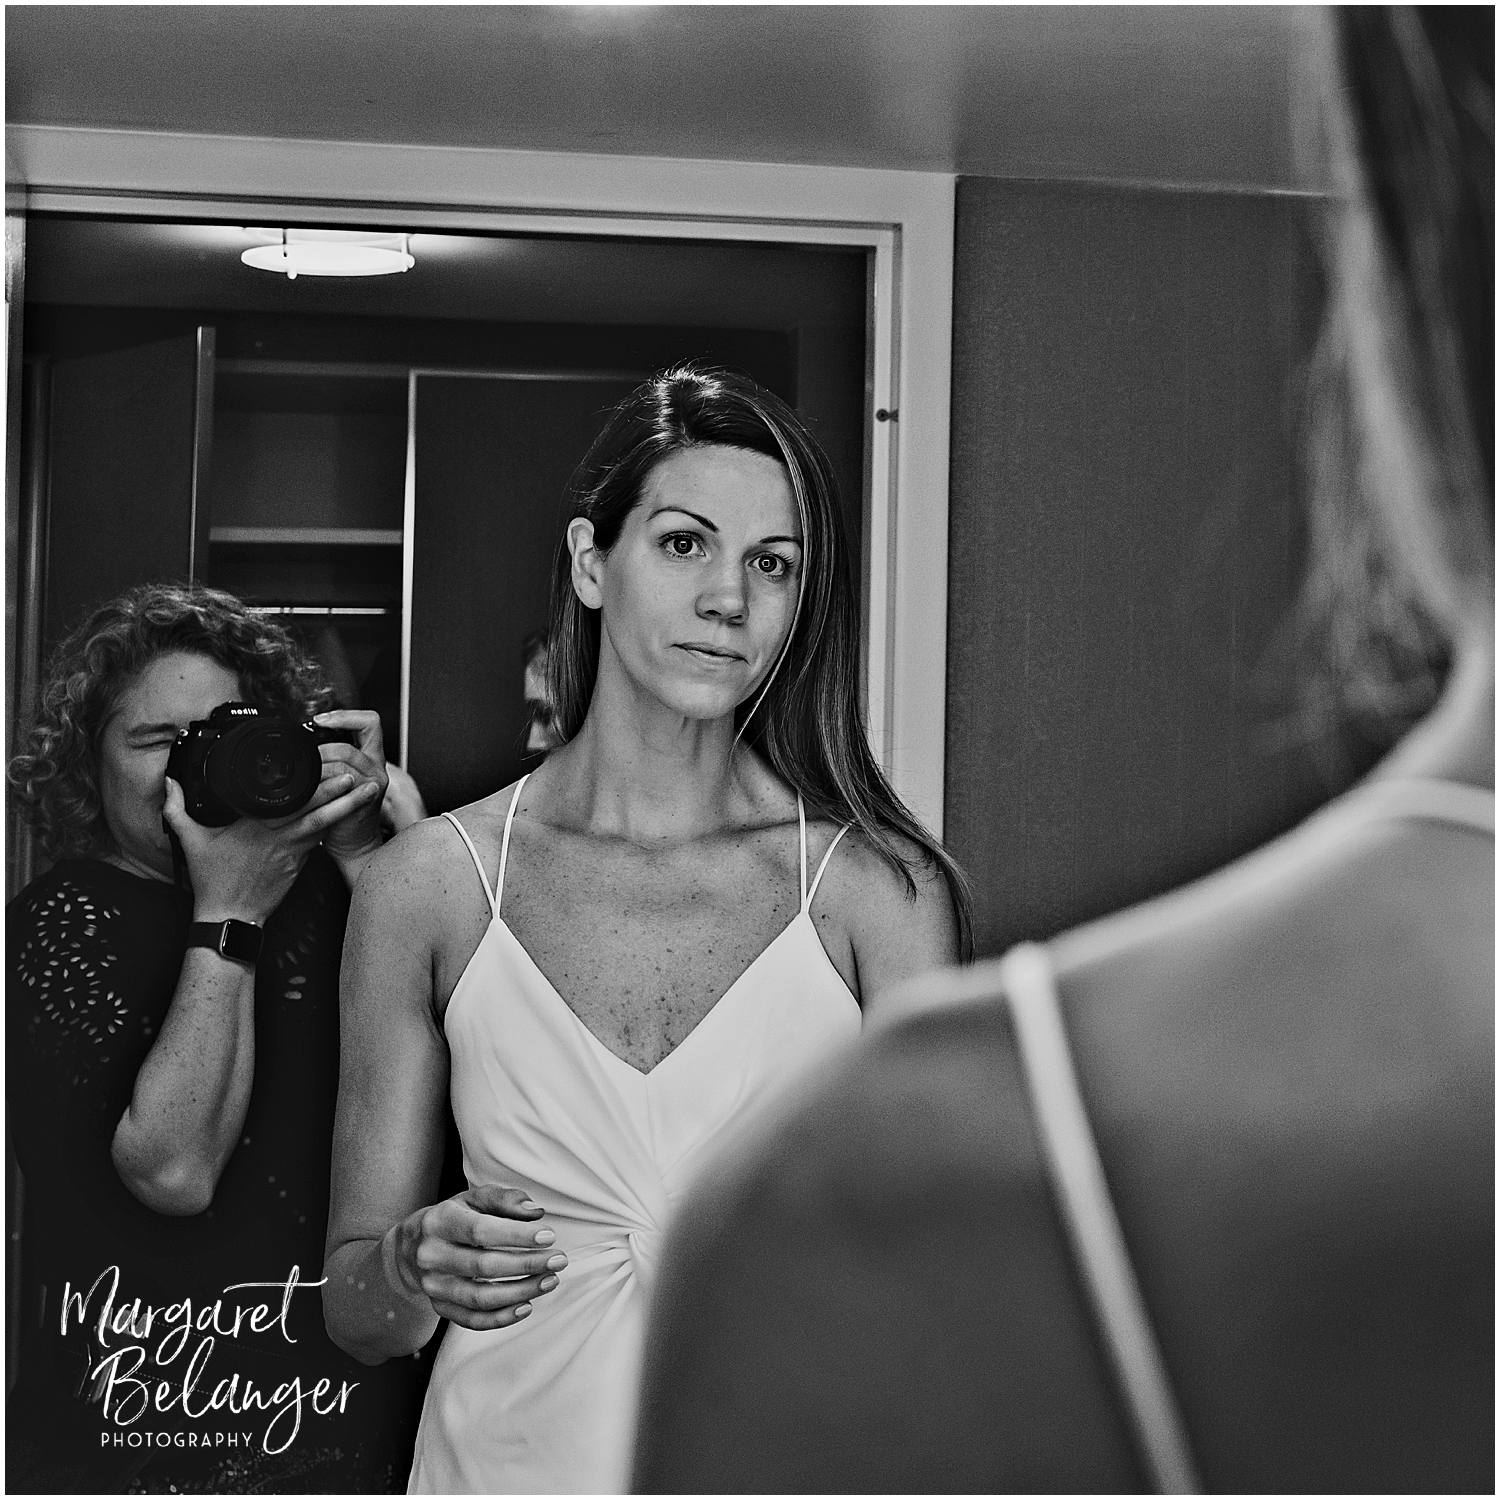 A bride in a white dress looks into a mirror while a photographer captures the moment.